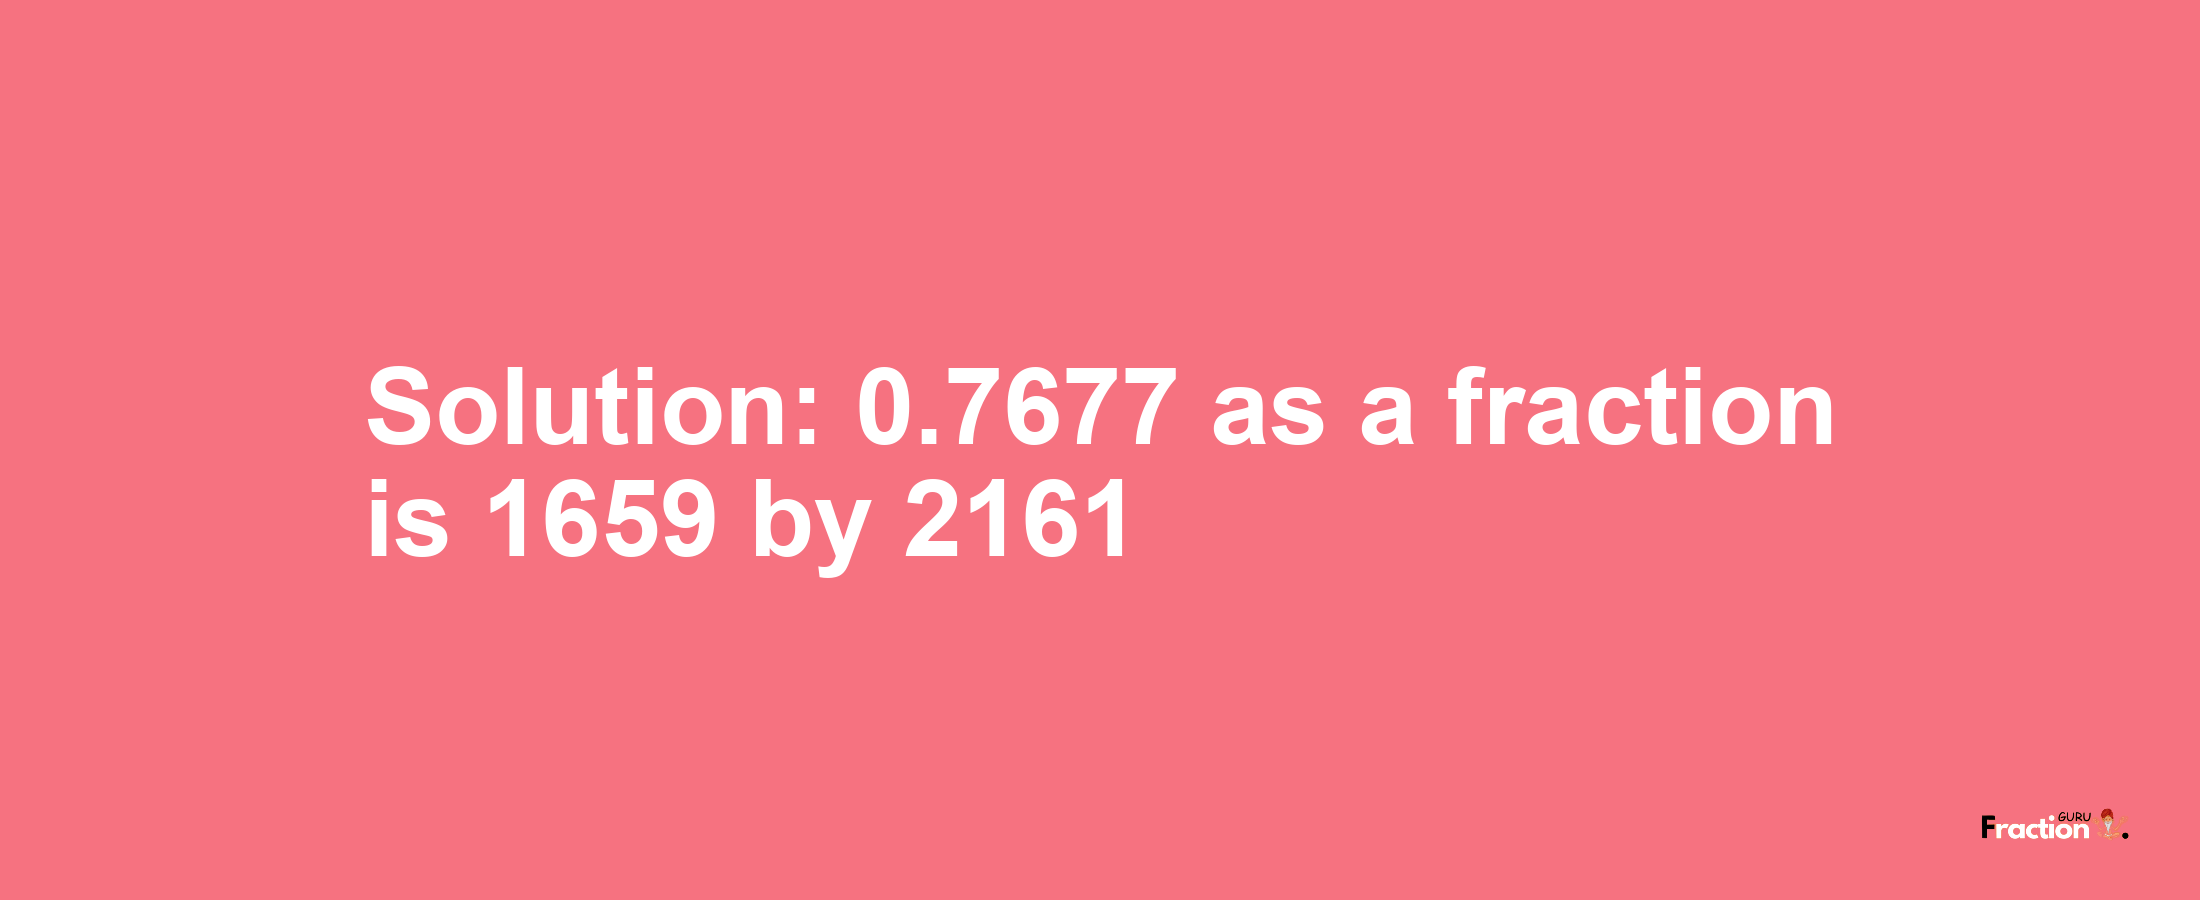 Solution:0.7677 as a fraction is 1659/2161